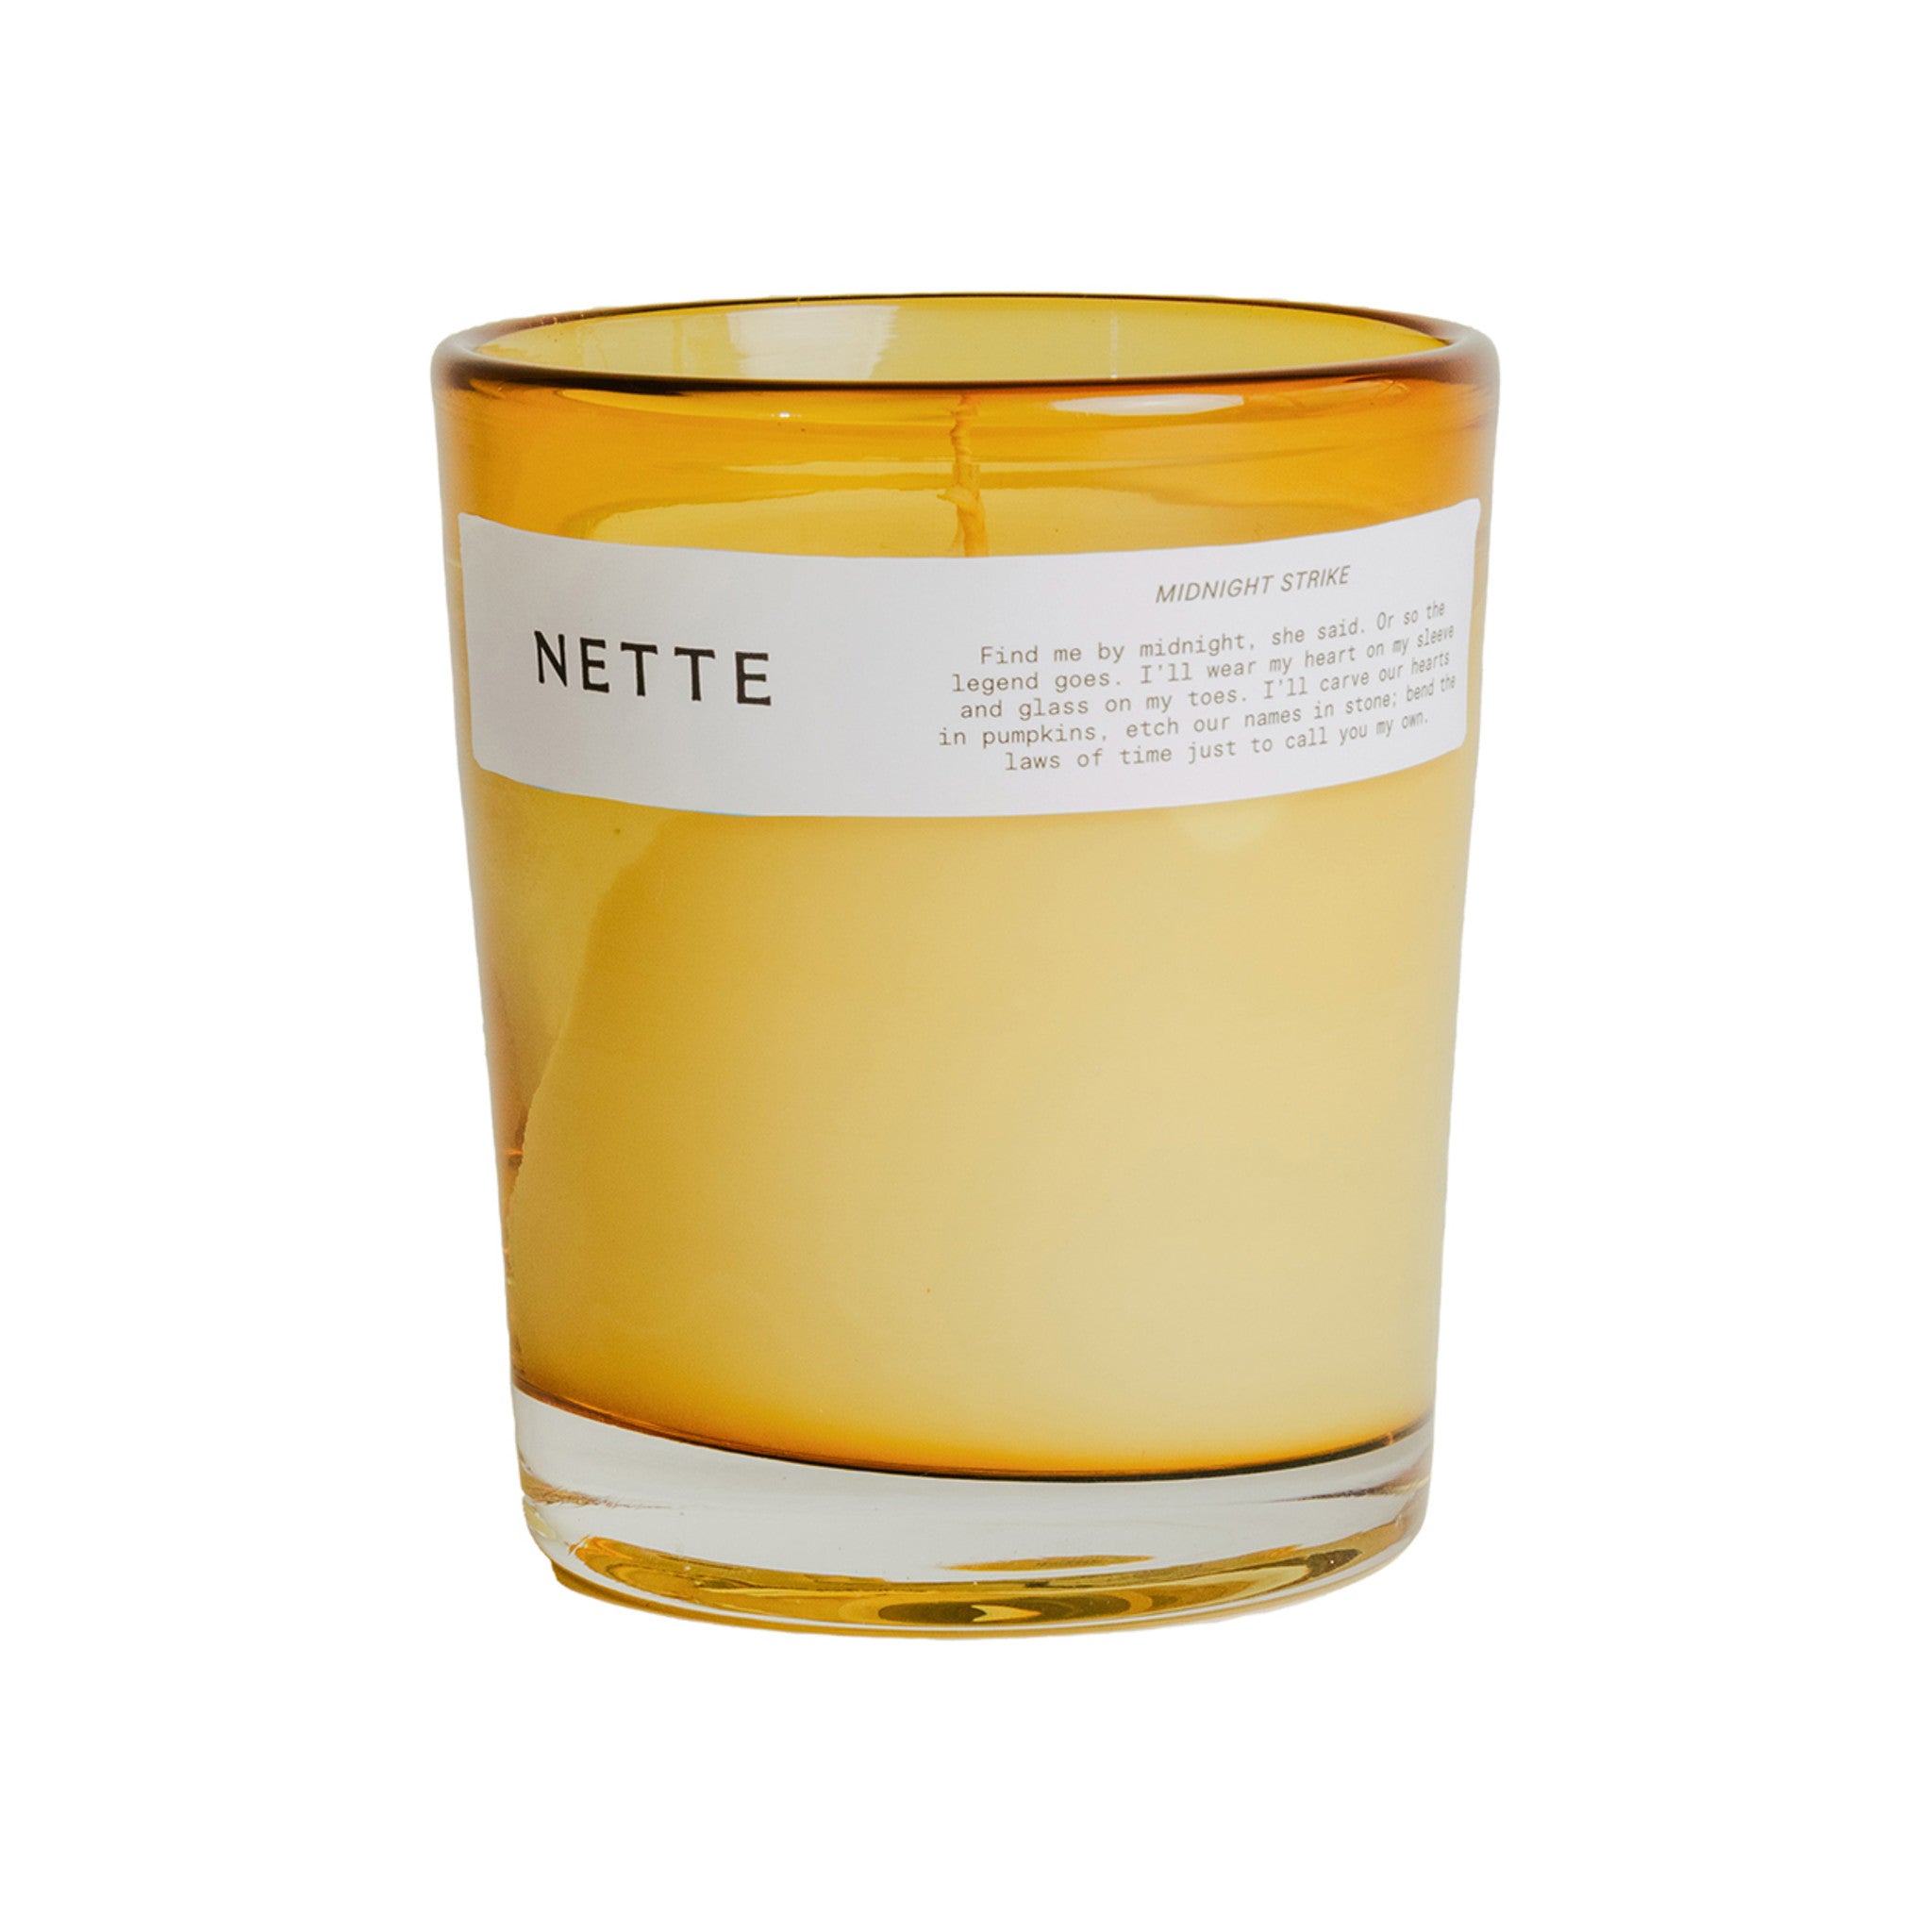 Nette Midnight Strike Candle main image.